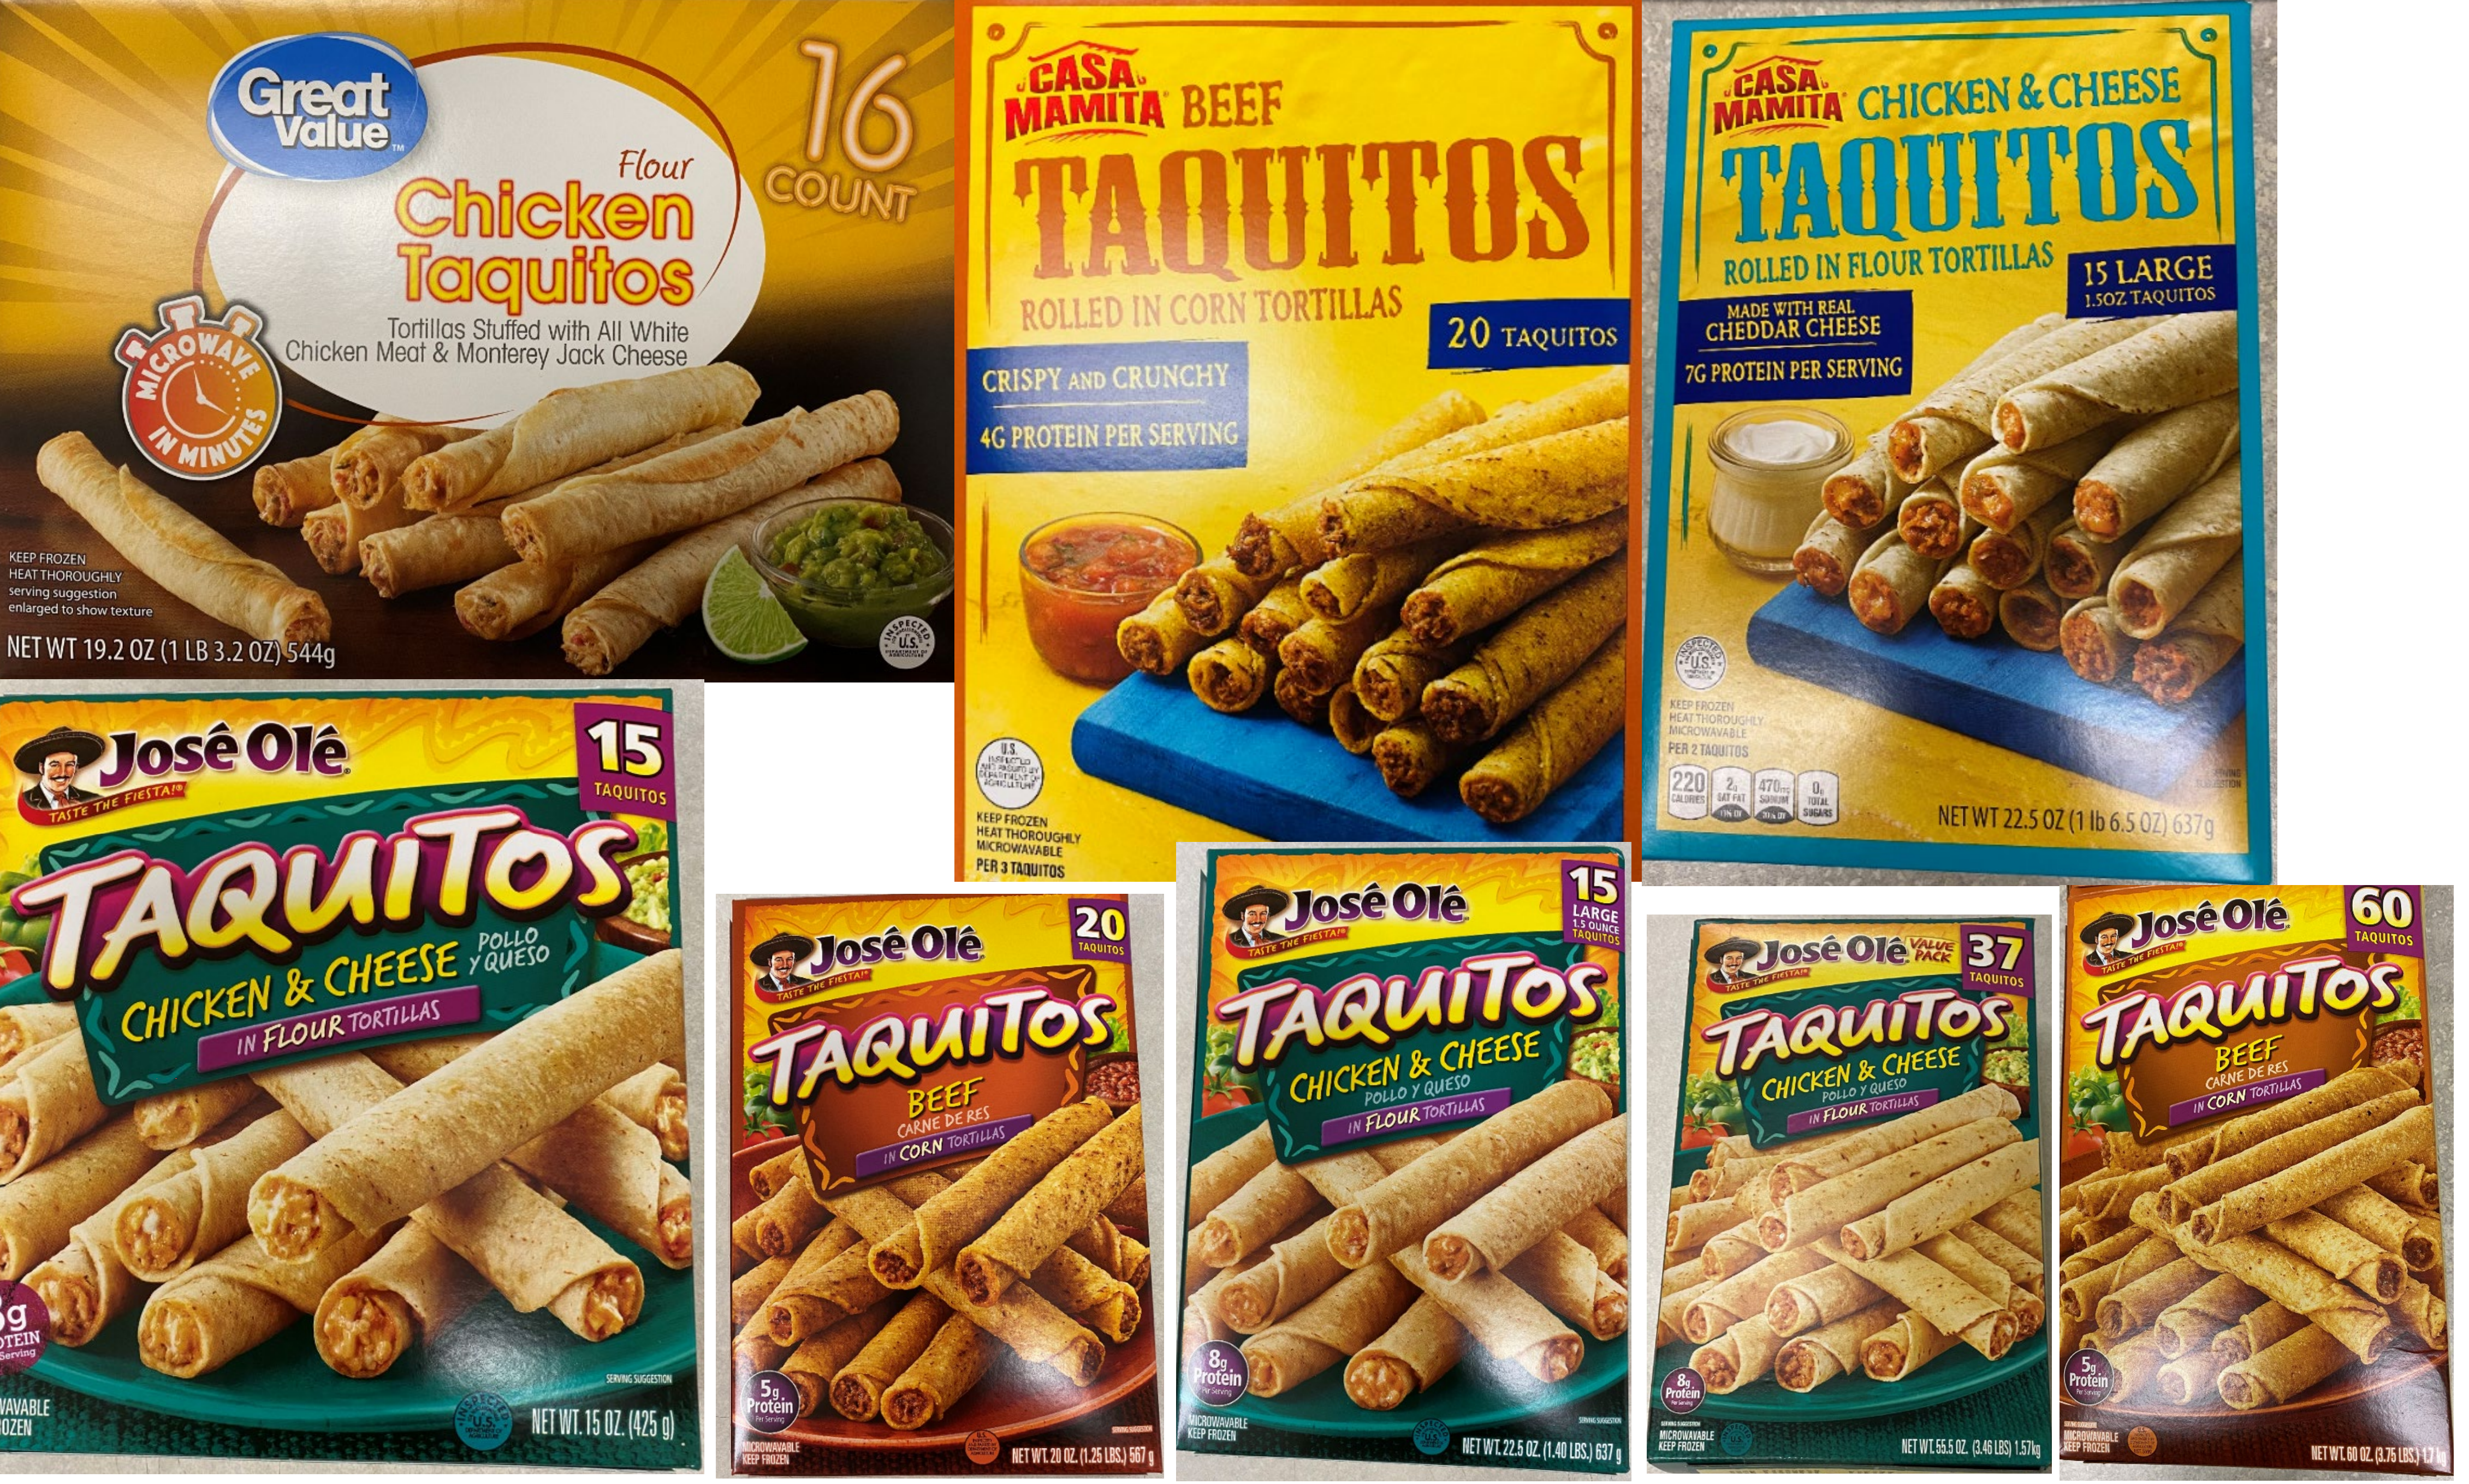 RECALL: Ready-to-Eat Taquitos and Chimichangas may contain hard plastic